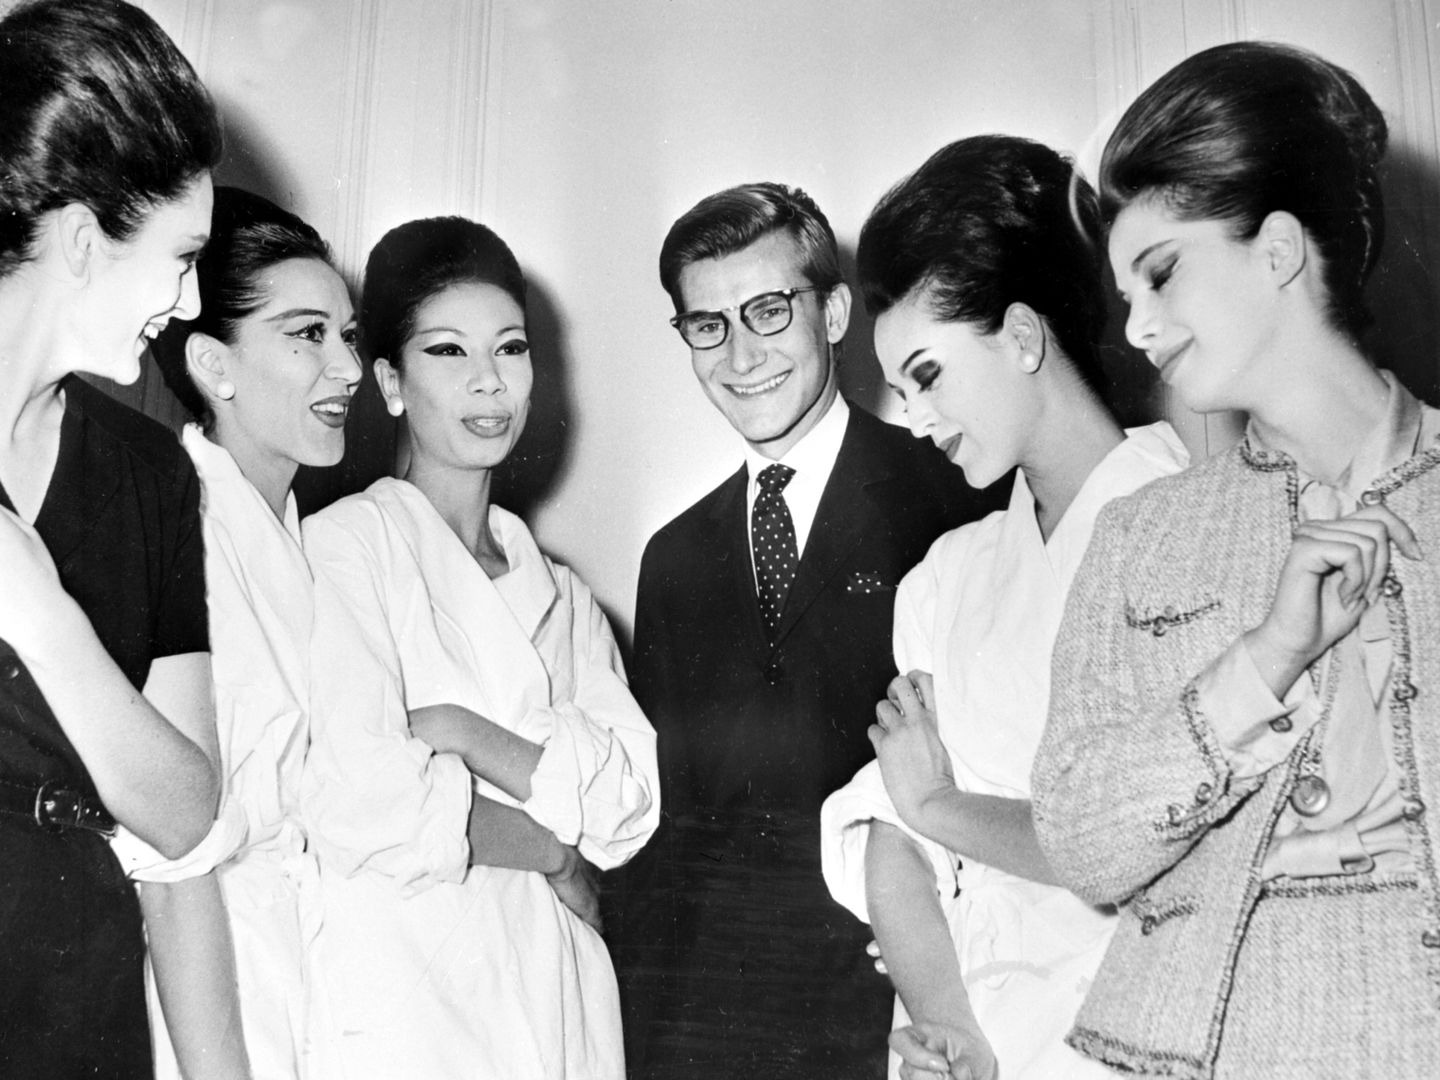 Yves Saint Laurent poses smiling next to five models